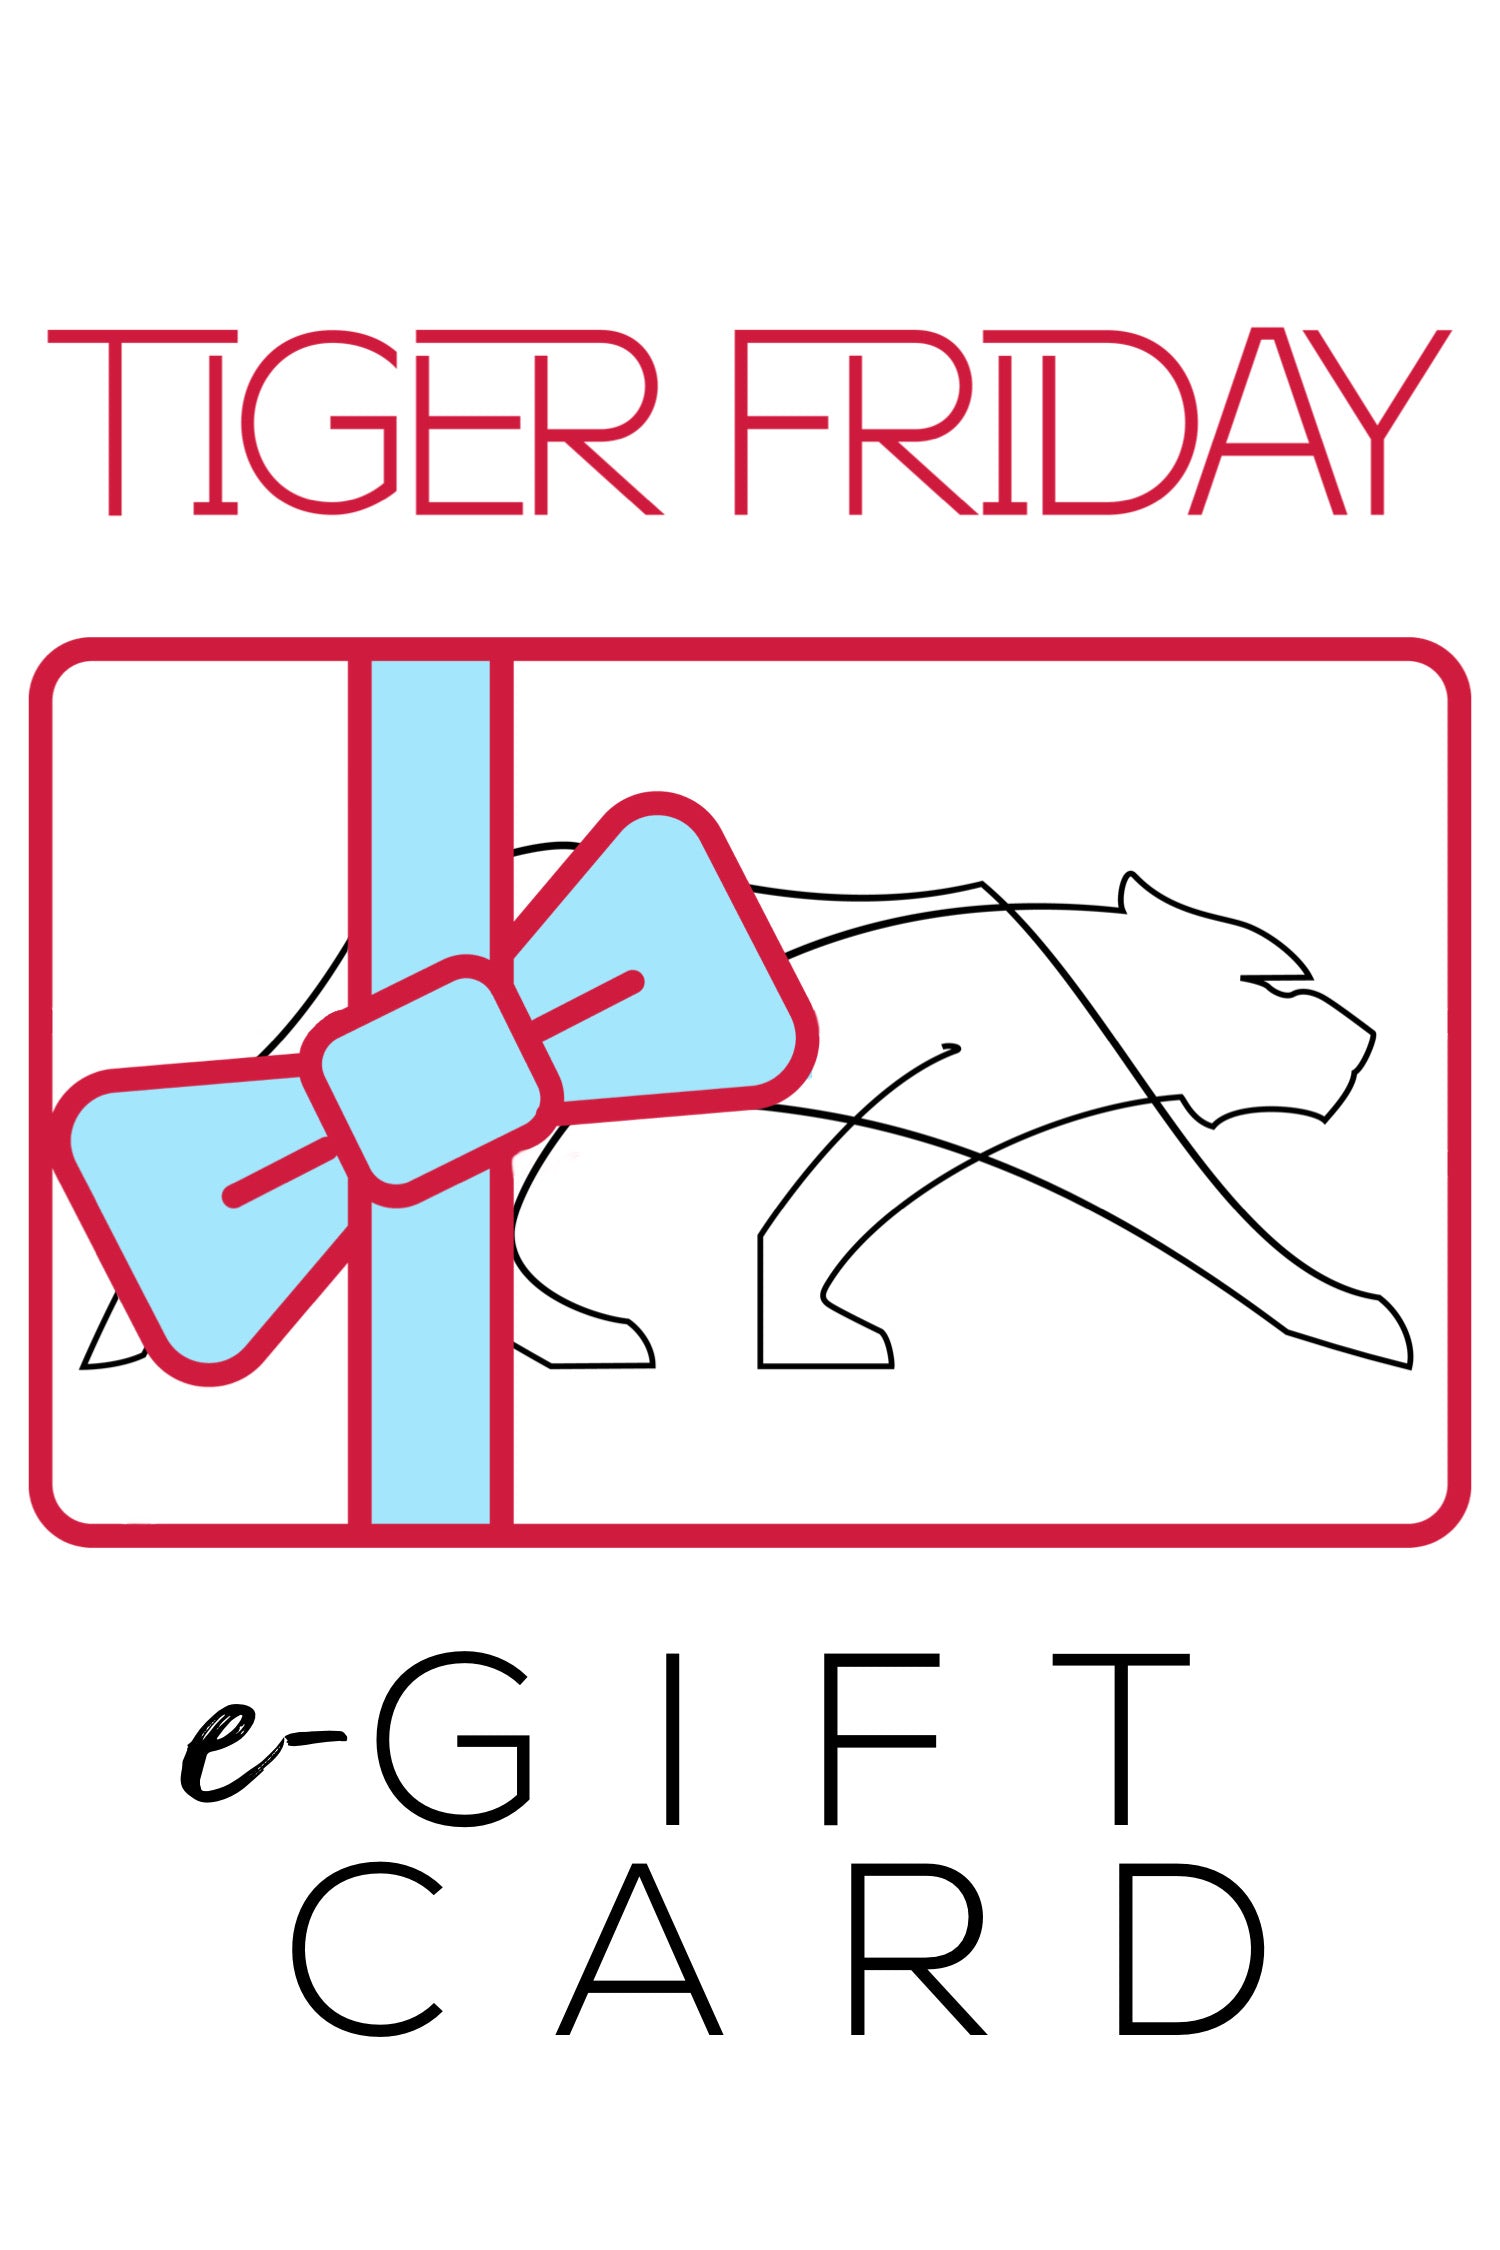 Tiger Friday Online Shop for Tiger Friday e-Gift Card | Read Below Dancewear - View : 1